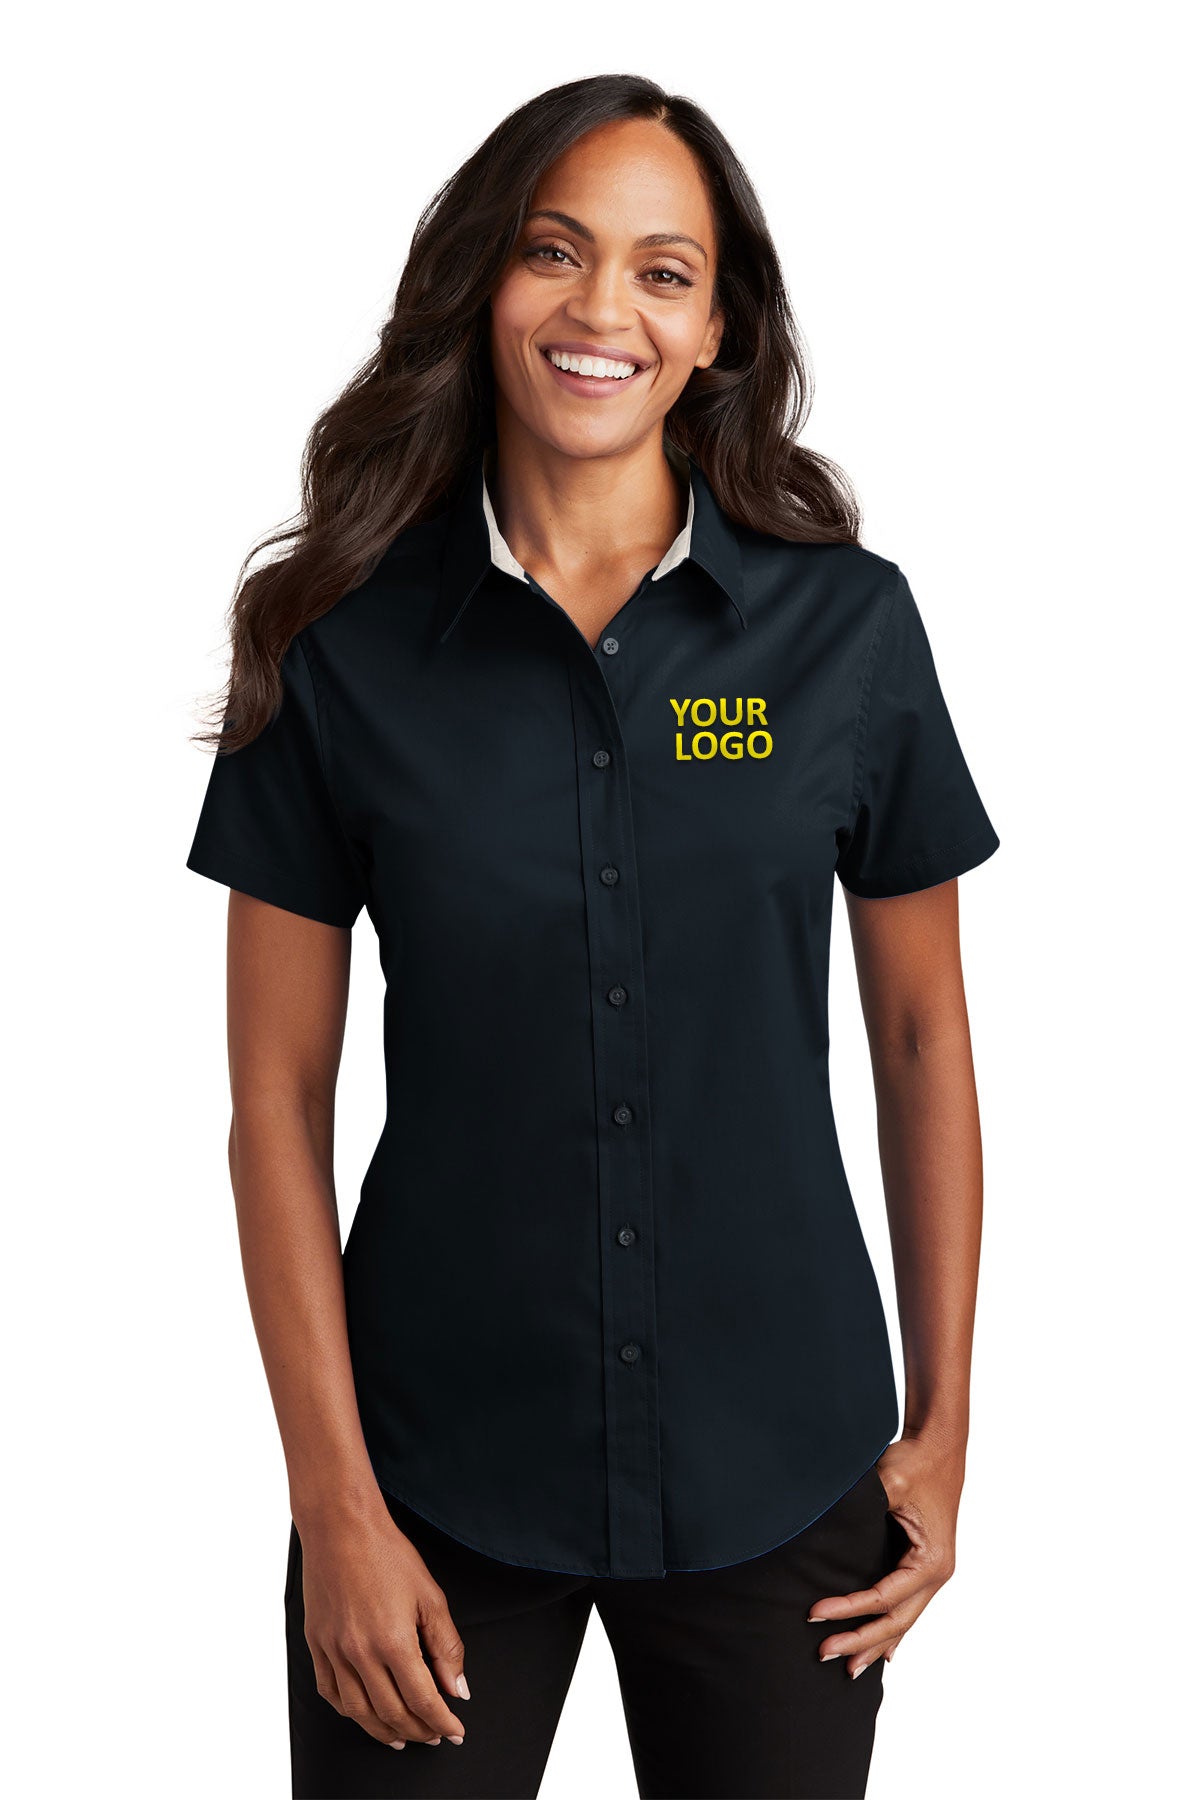 Port Authority Classic Navy/Light Stone L508 order embroidered polo shirts